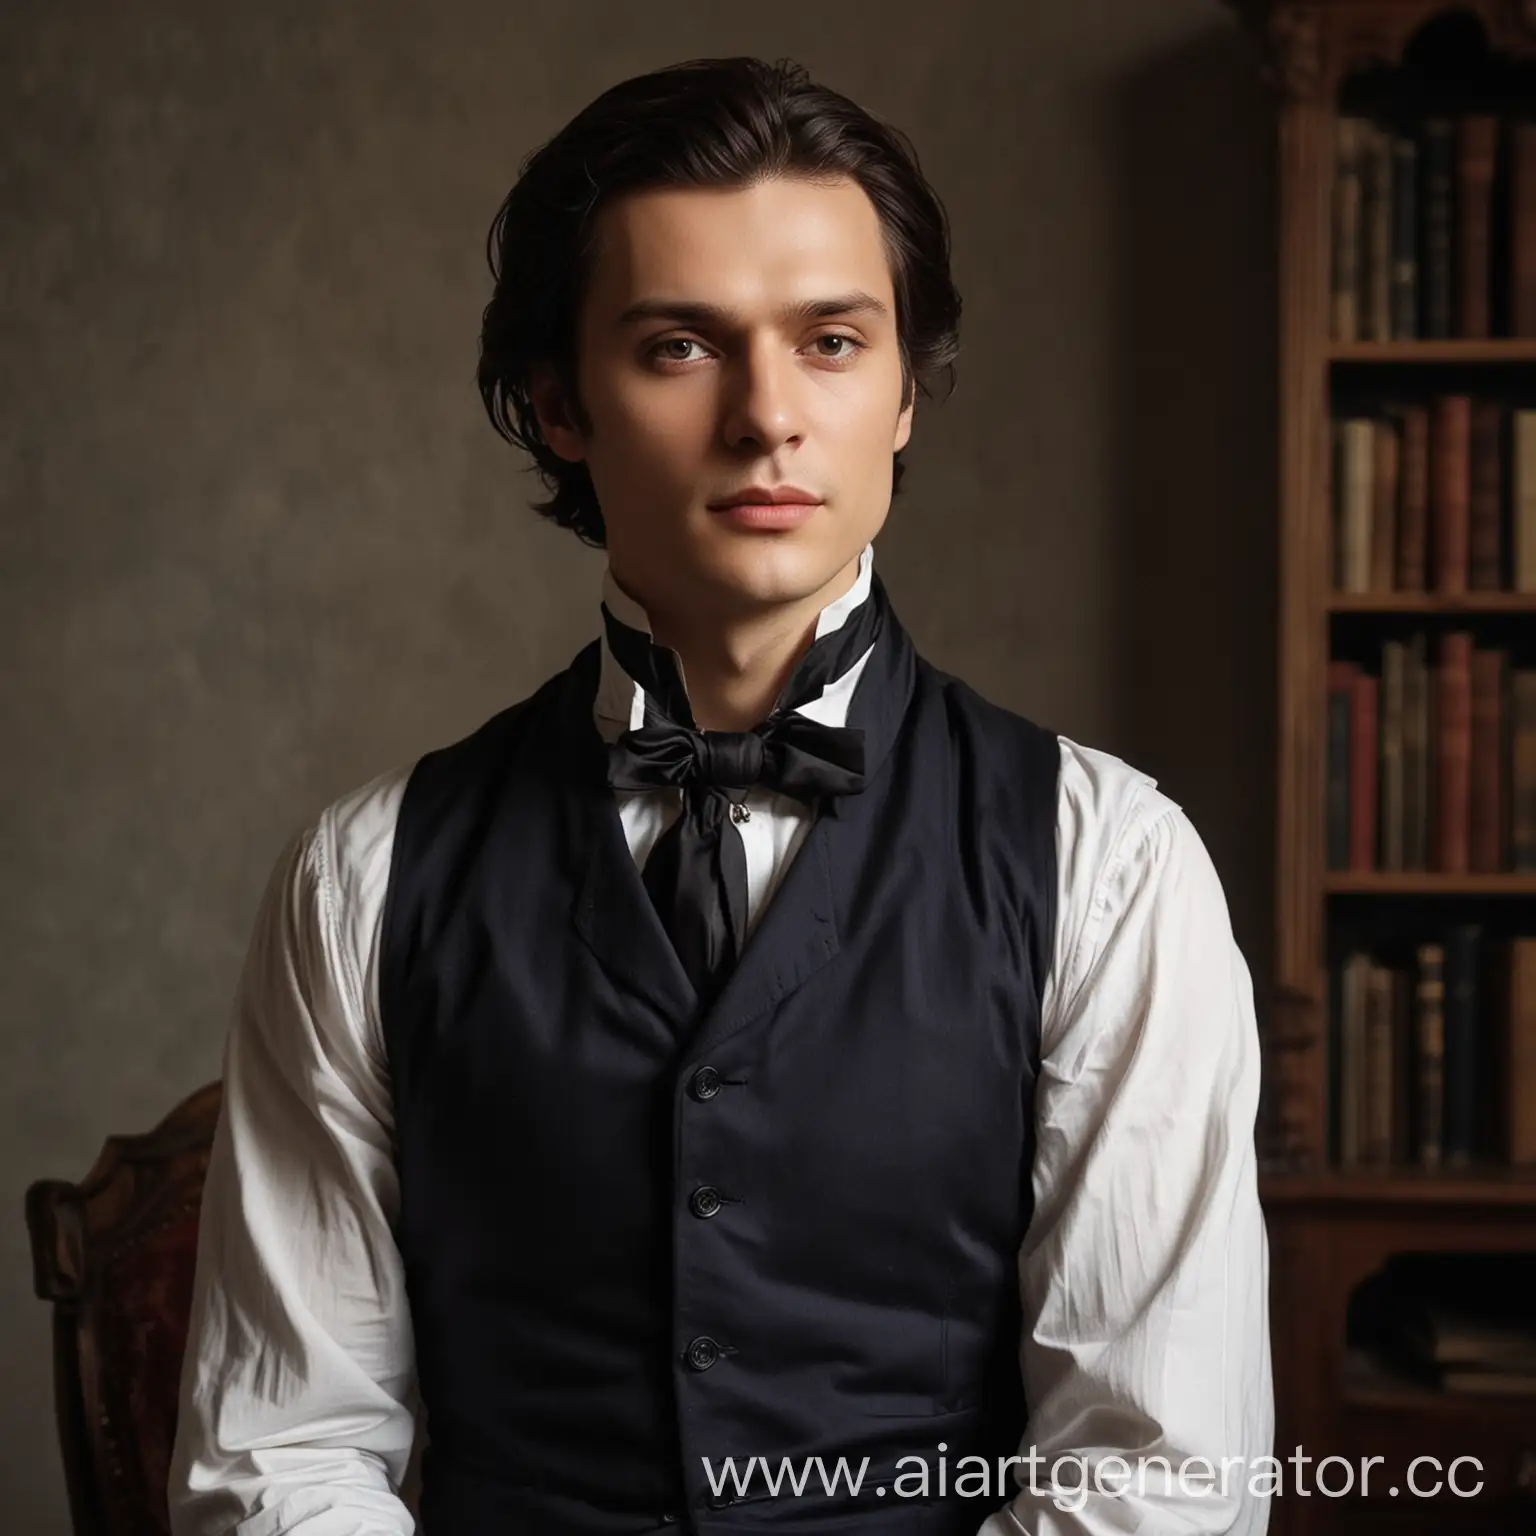 Portrait-of-Evgeny-Onegin-Elegant-Gentleman-in-Evening-Attire-and-Thoughtful-Pose